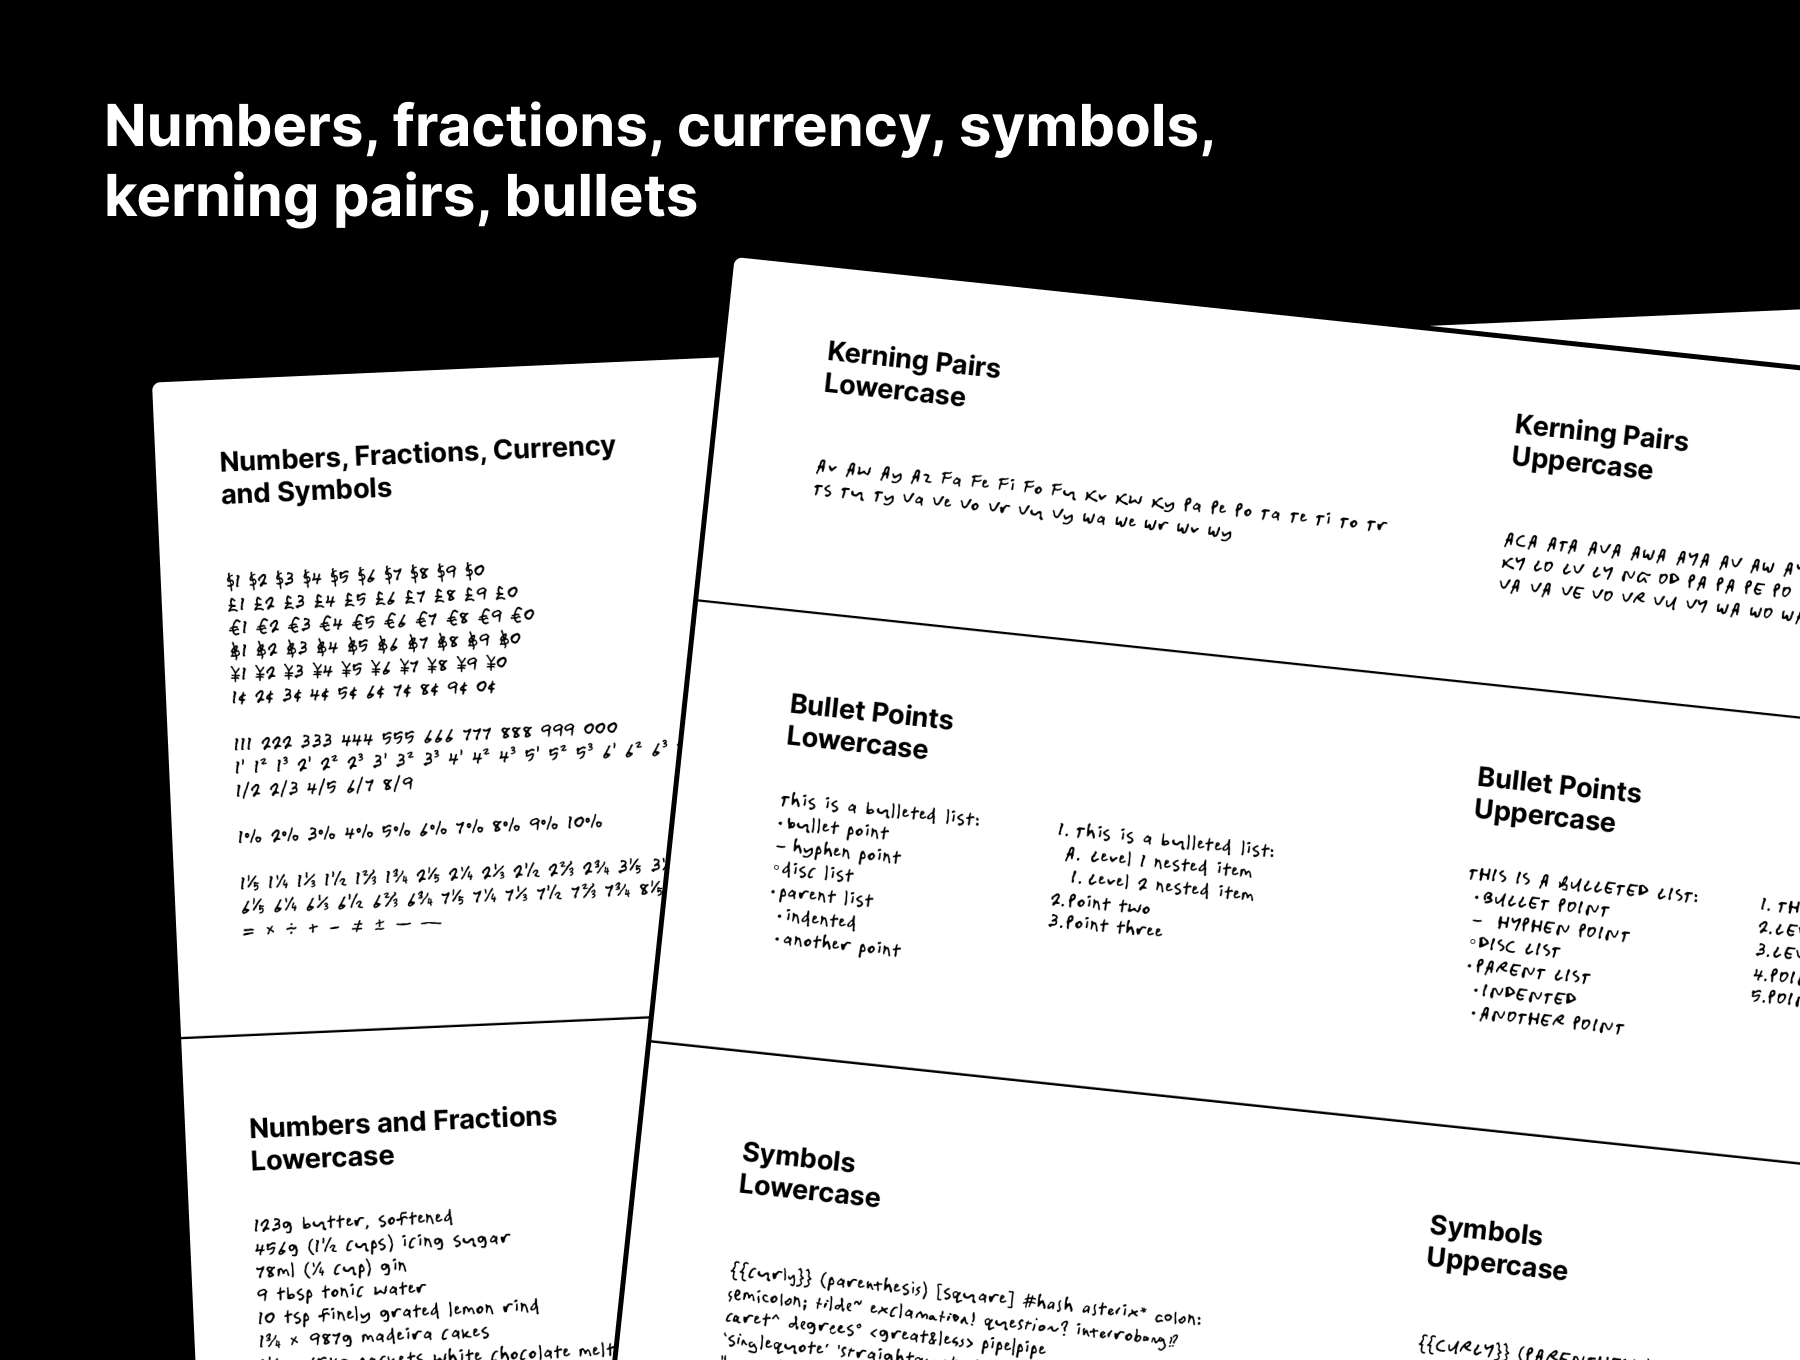 Type Testing Template: Numbers, fractions, currency, symbols, kerning pairs, bullets